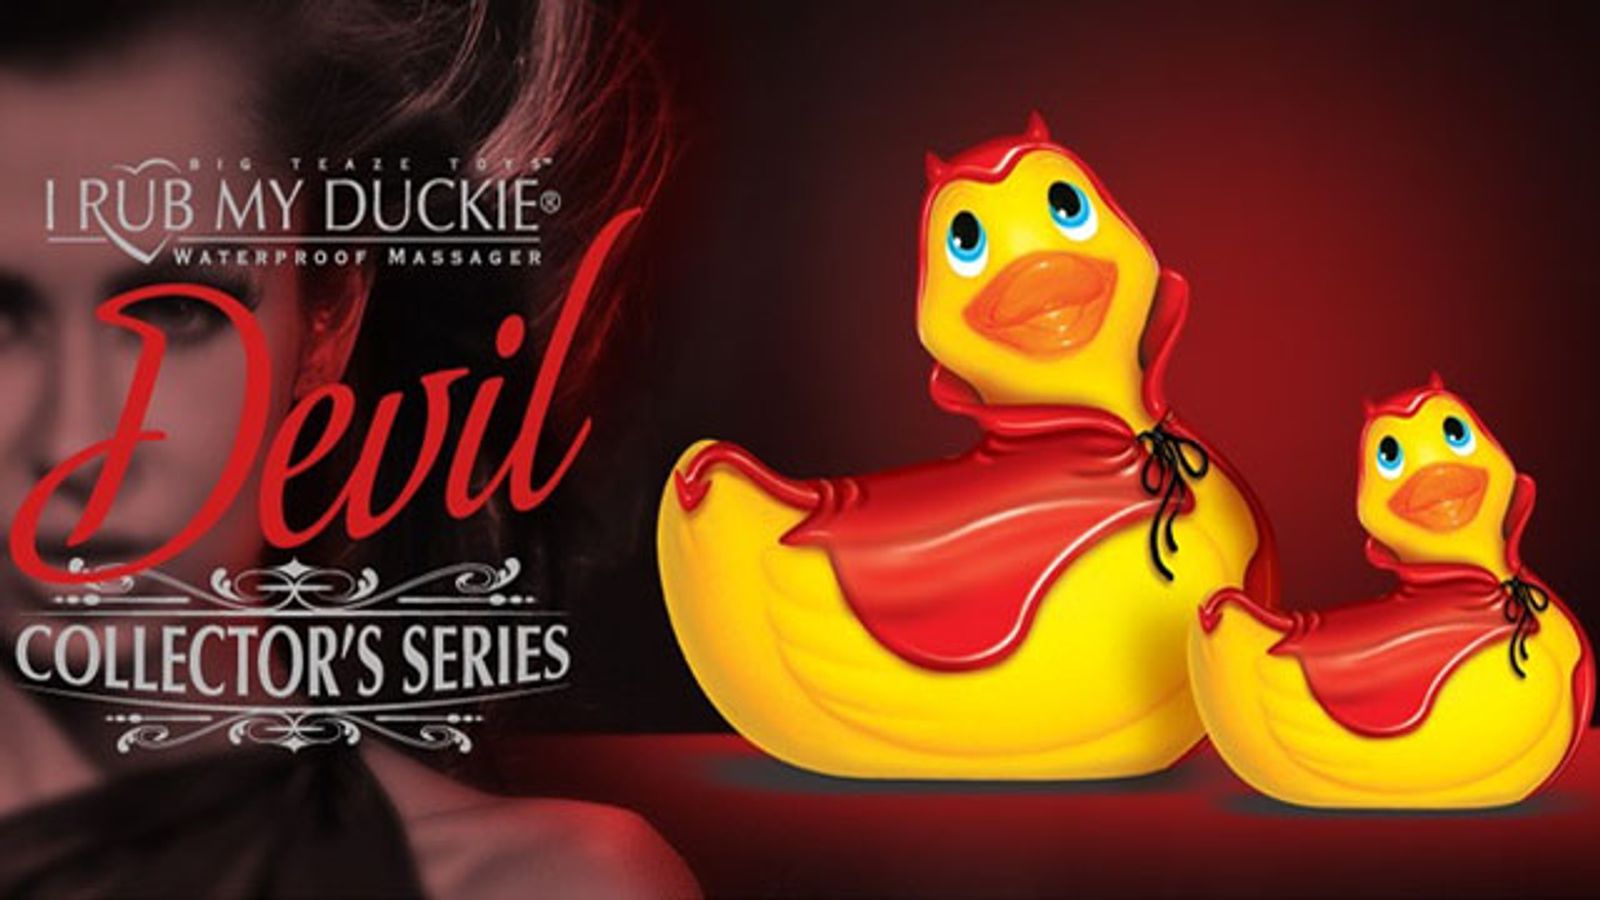 I Rub My Duckie Products Are Cover Models For Spanish Novels